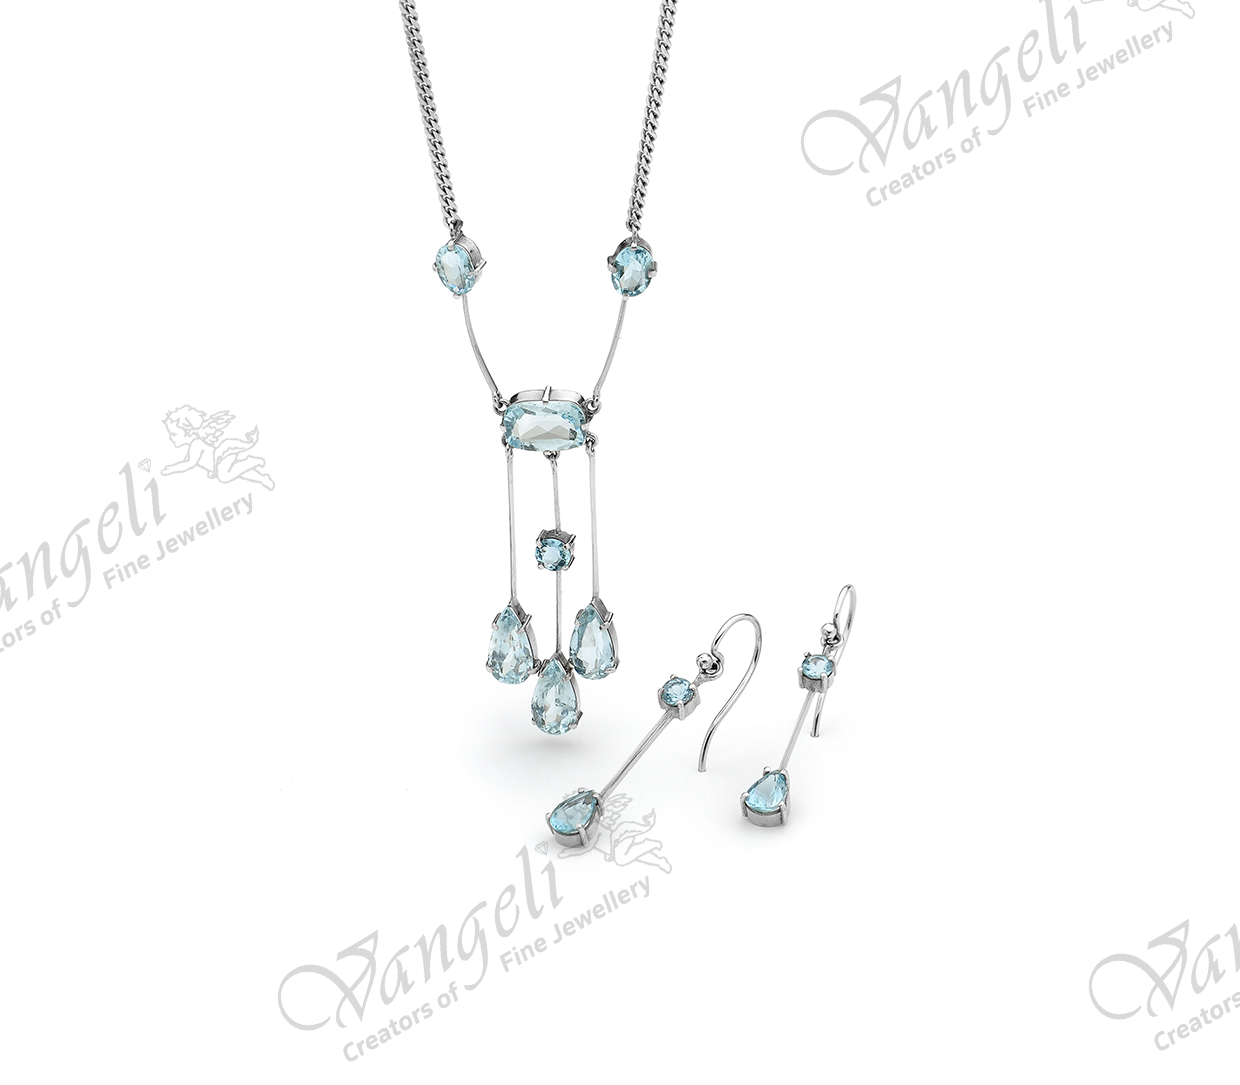 Custom designed 18ct white gold with hand-cut aquamarines necklace and matching earrings